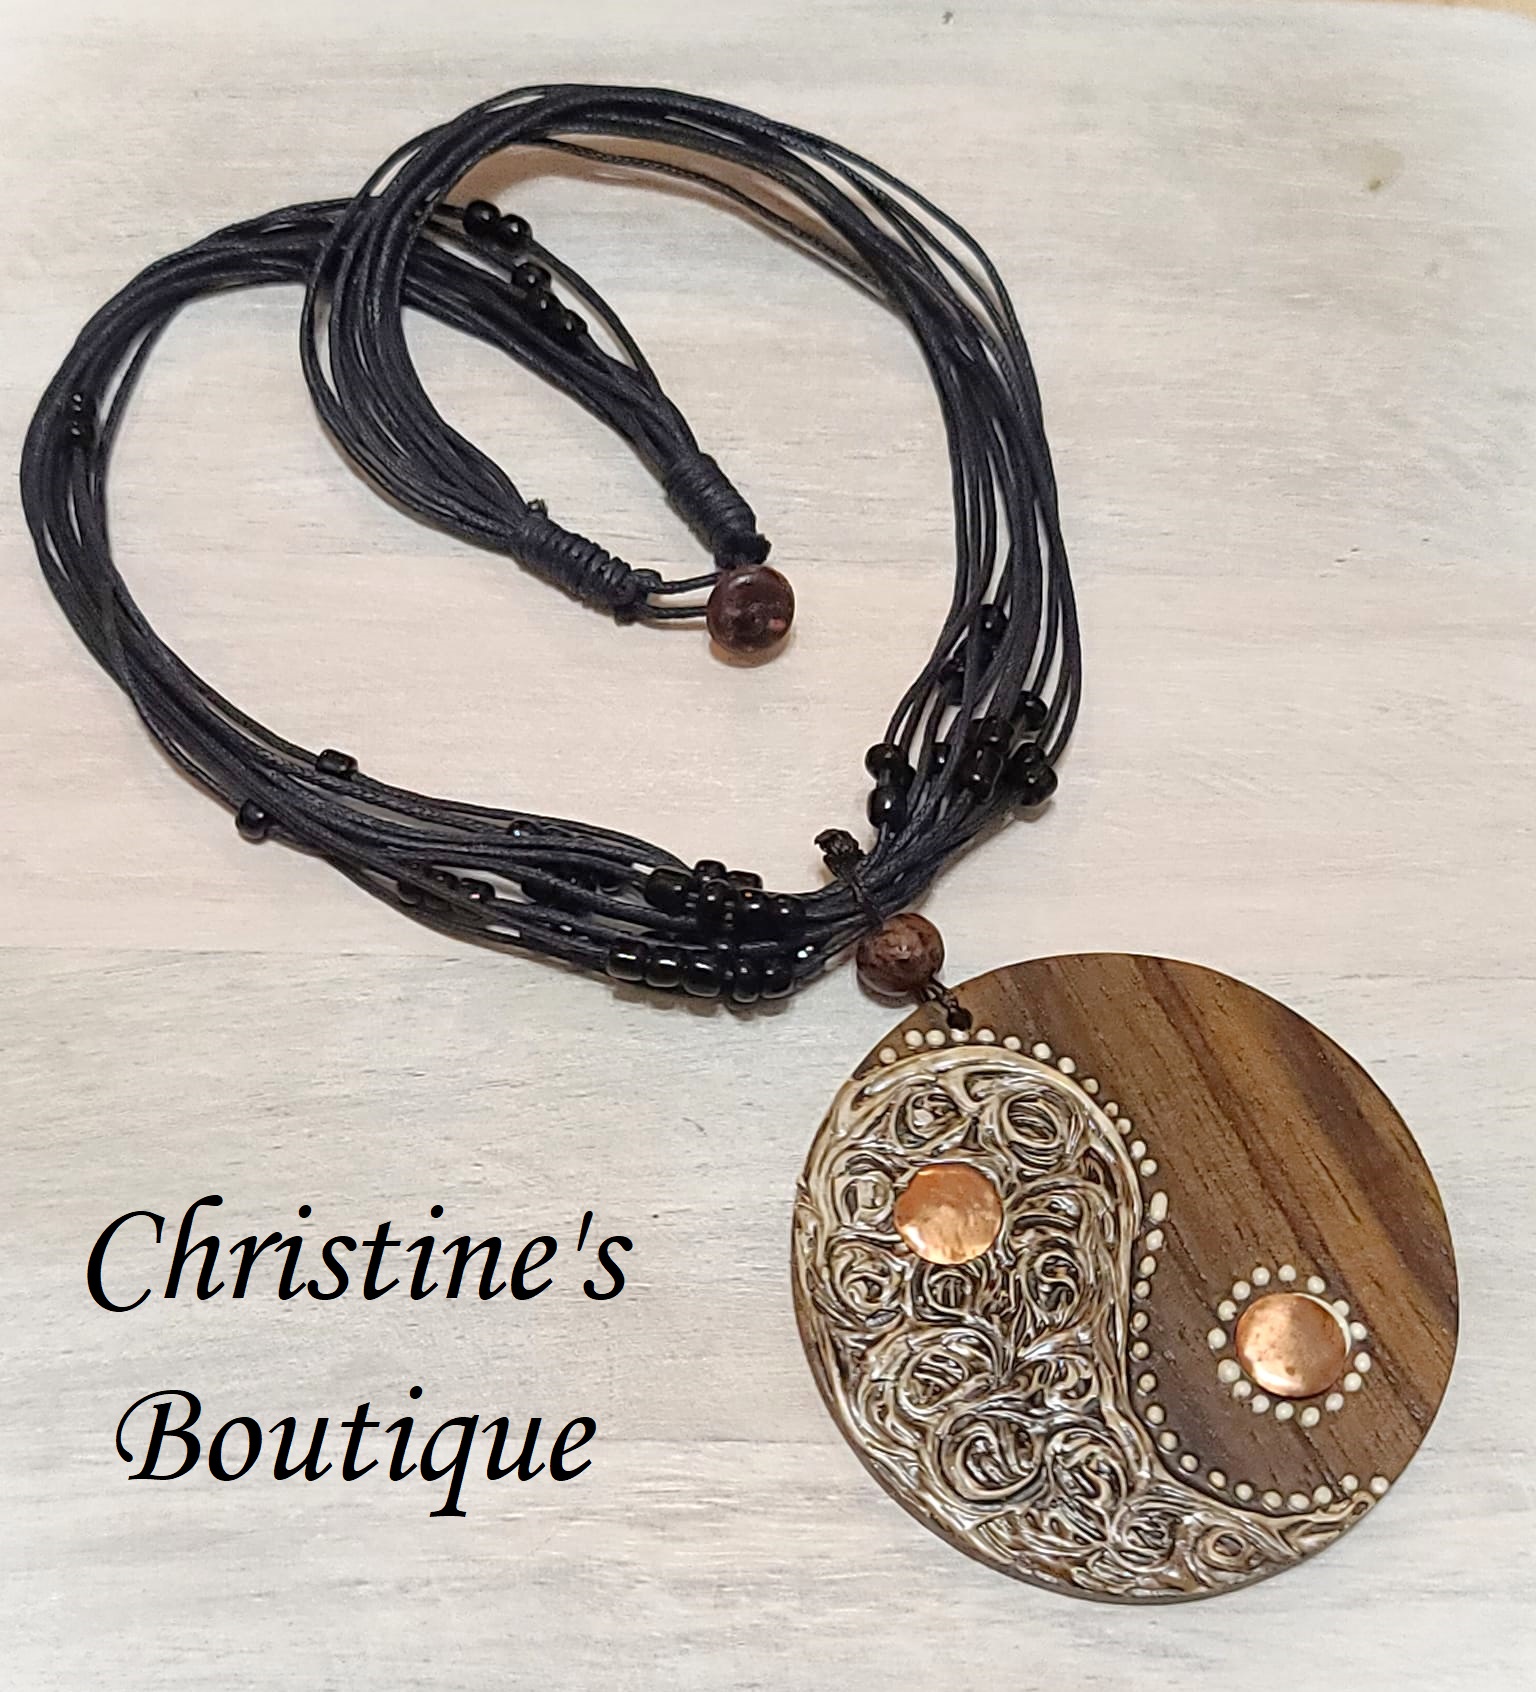 Copper and Wood Necklace Round Pendant